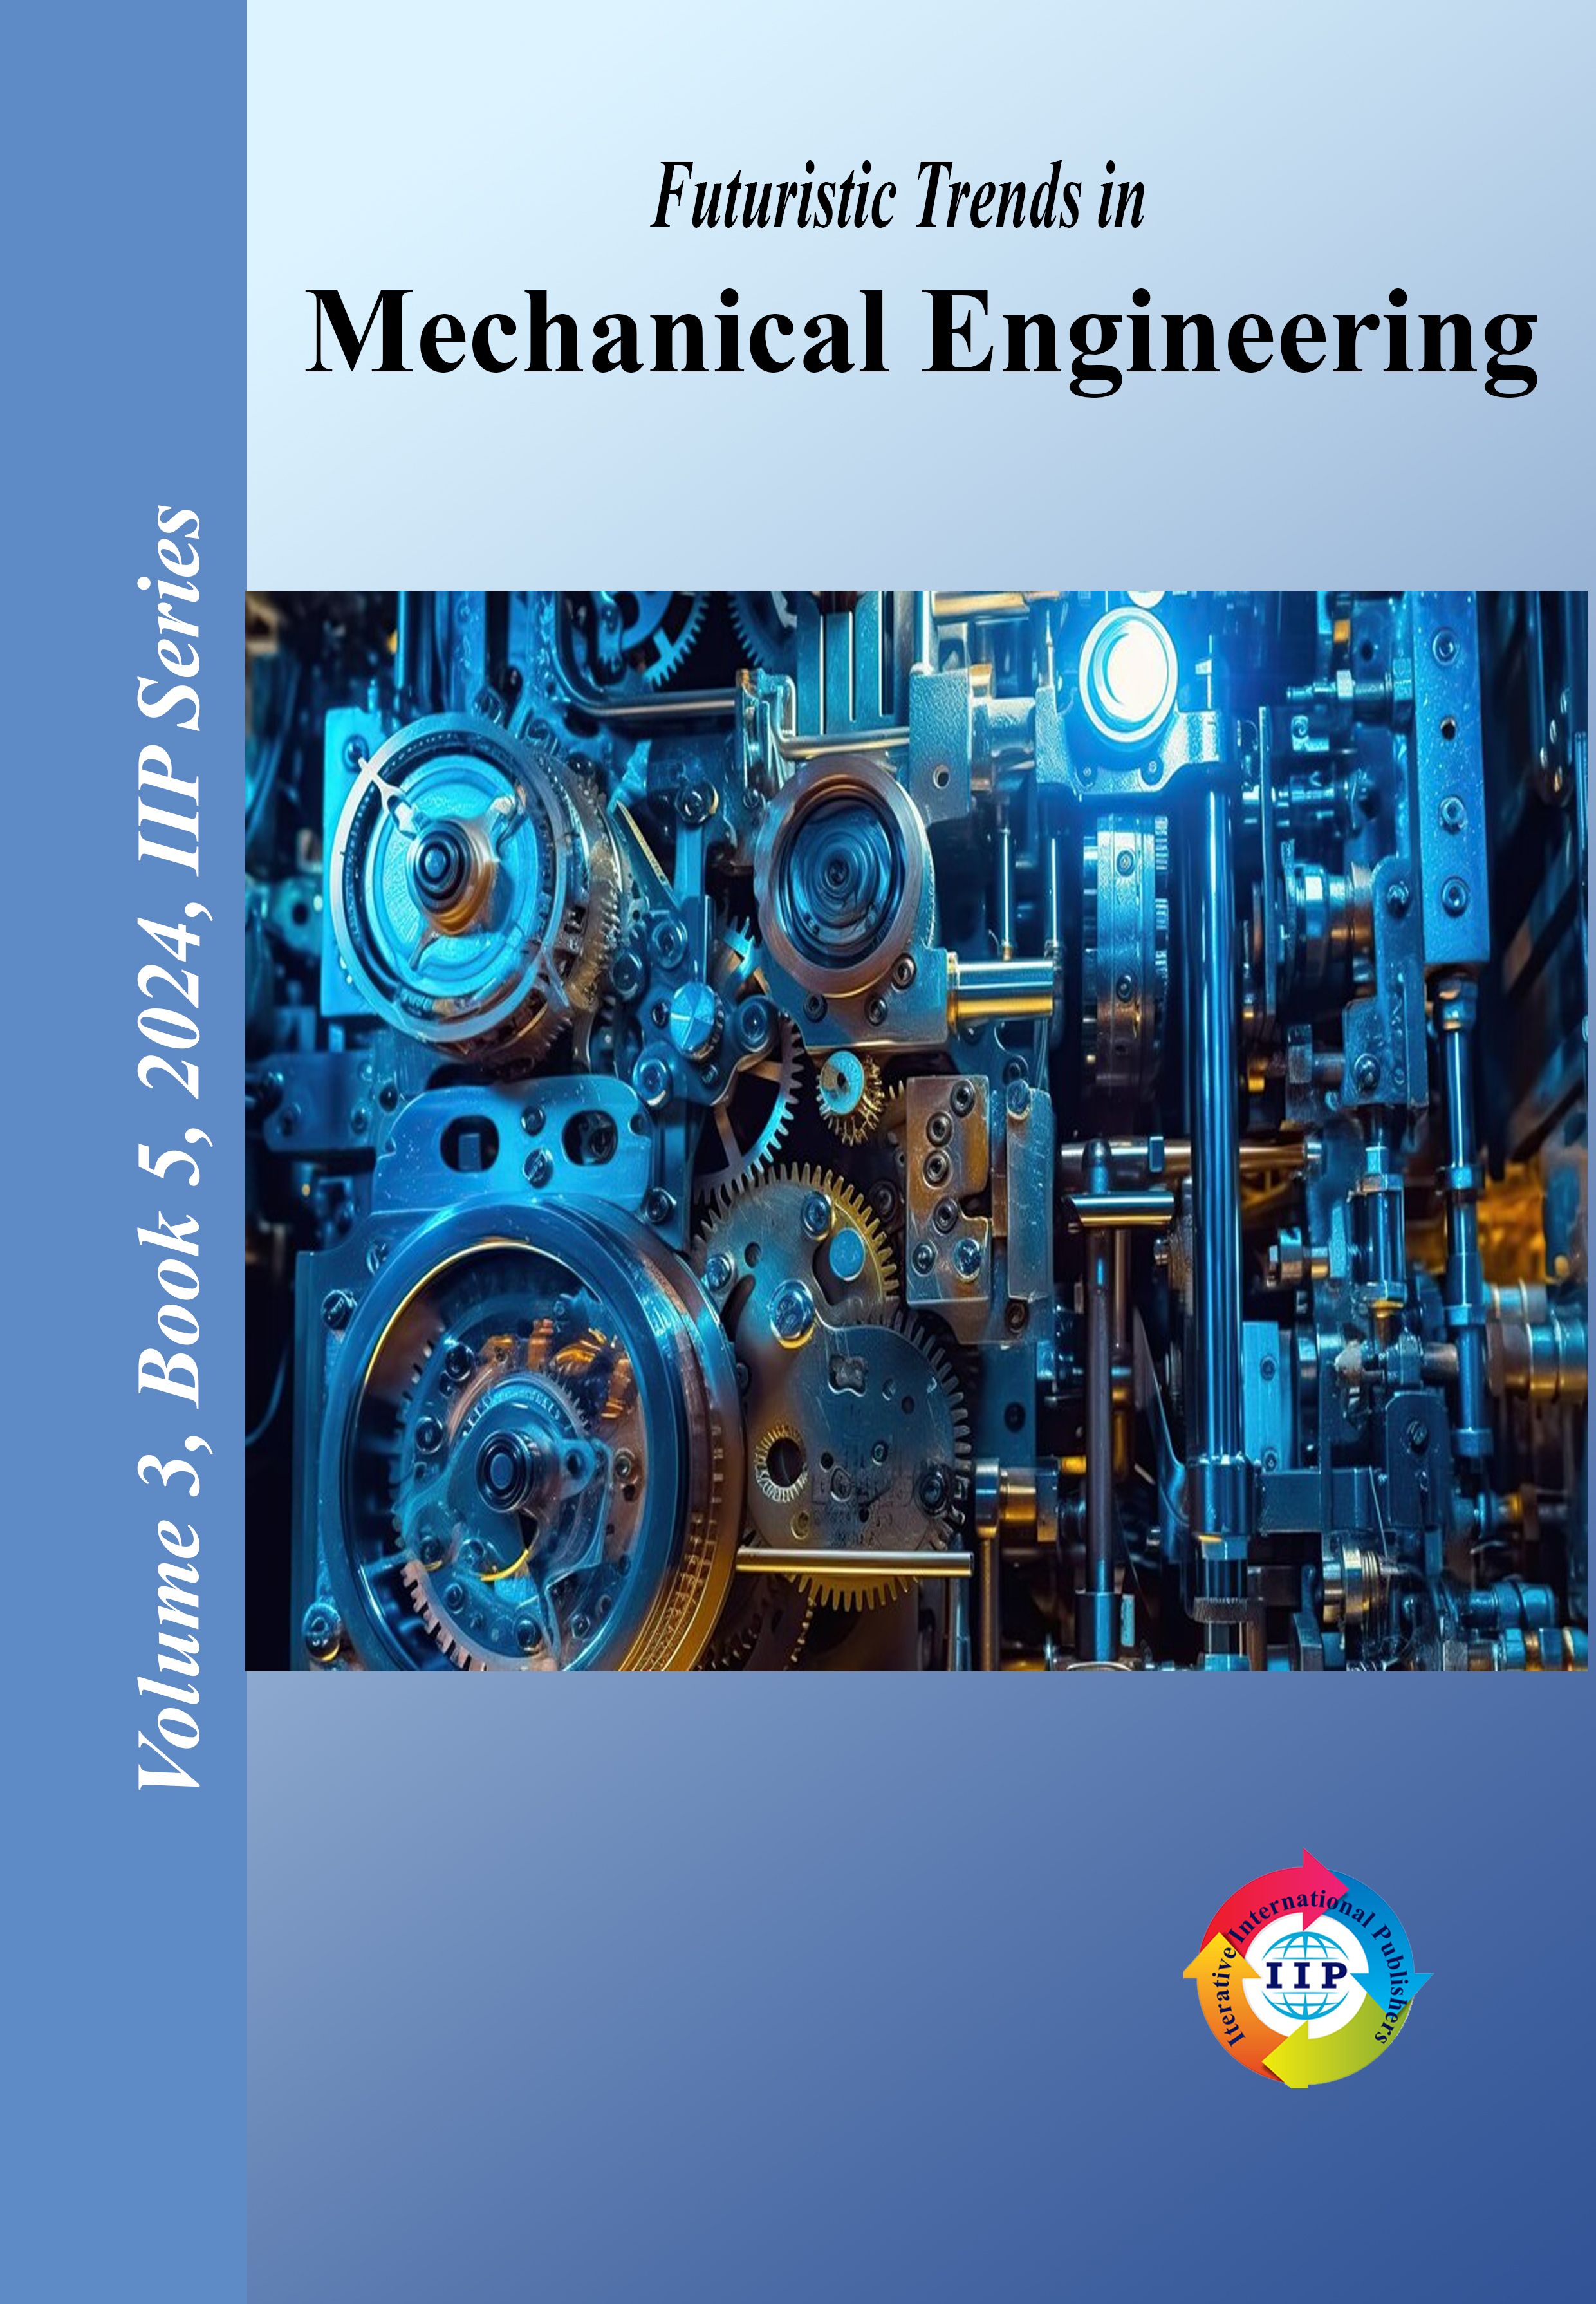 Futuristic Trends in Mechanical Engineering Volume 3 Book 5